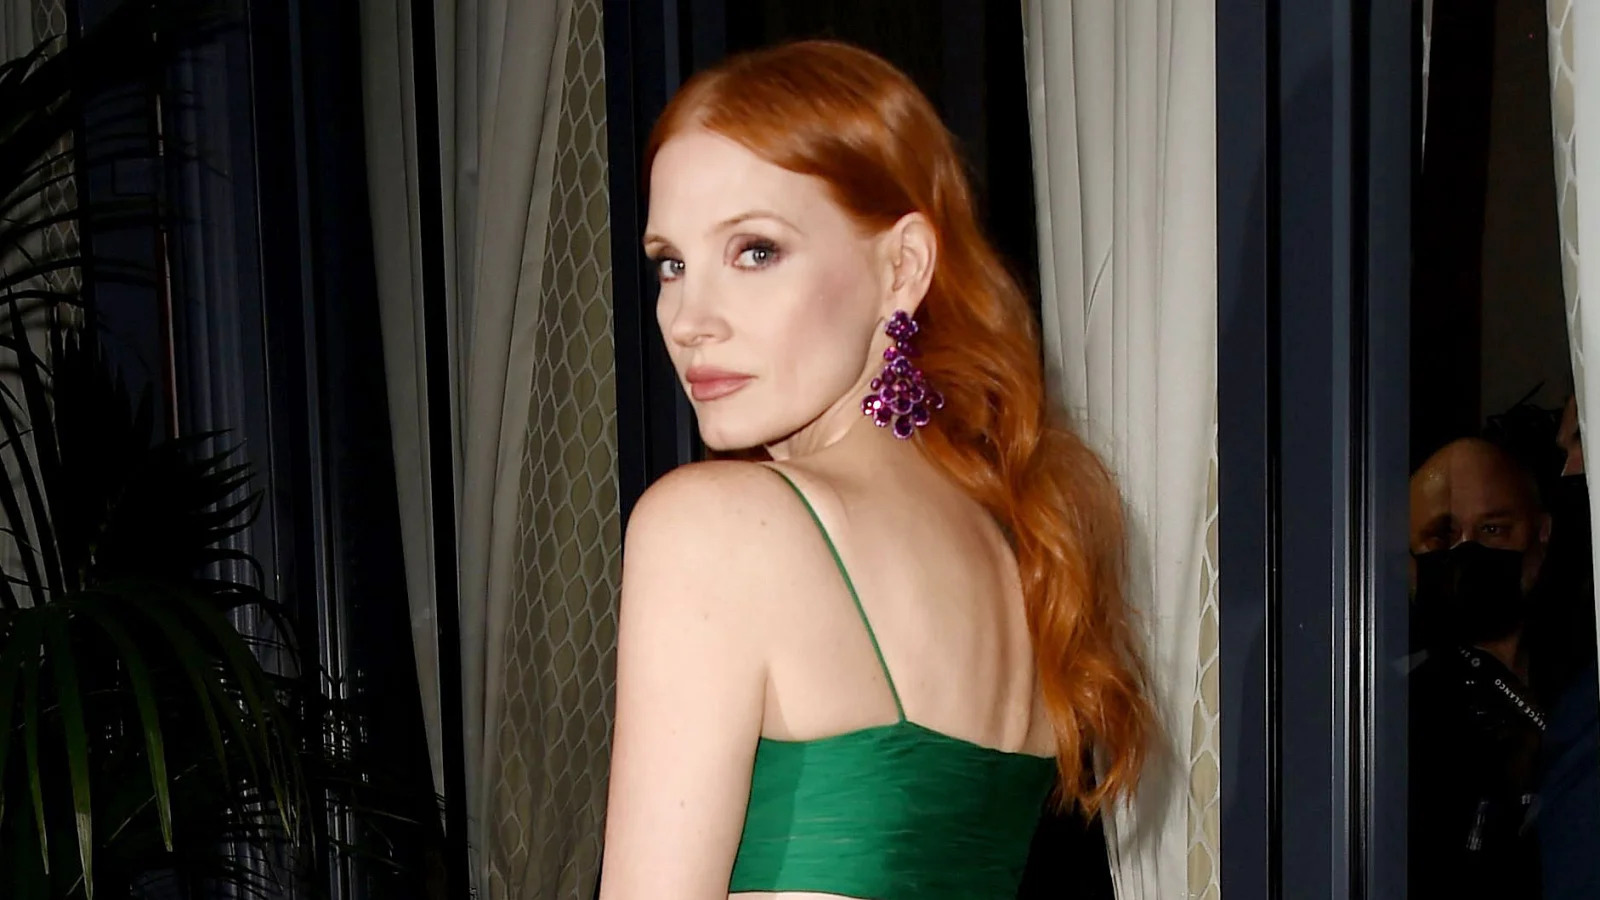 Will Evelyn Hugo's Seven Husbands, Jessica Chastain be in Netflix movie?  The answer of the actress